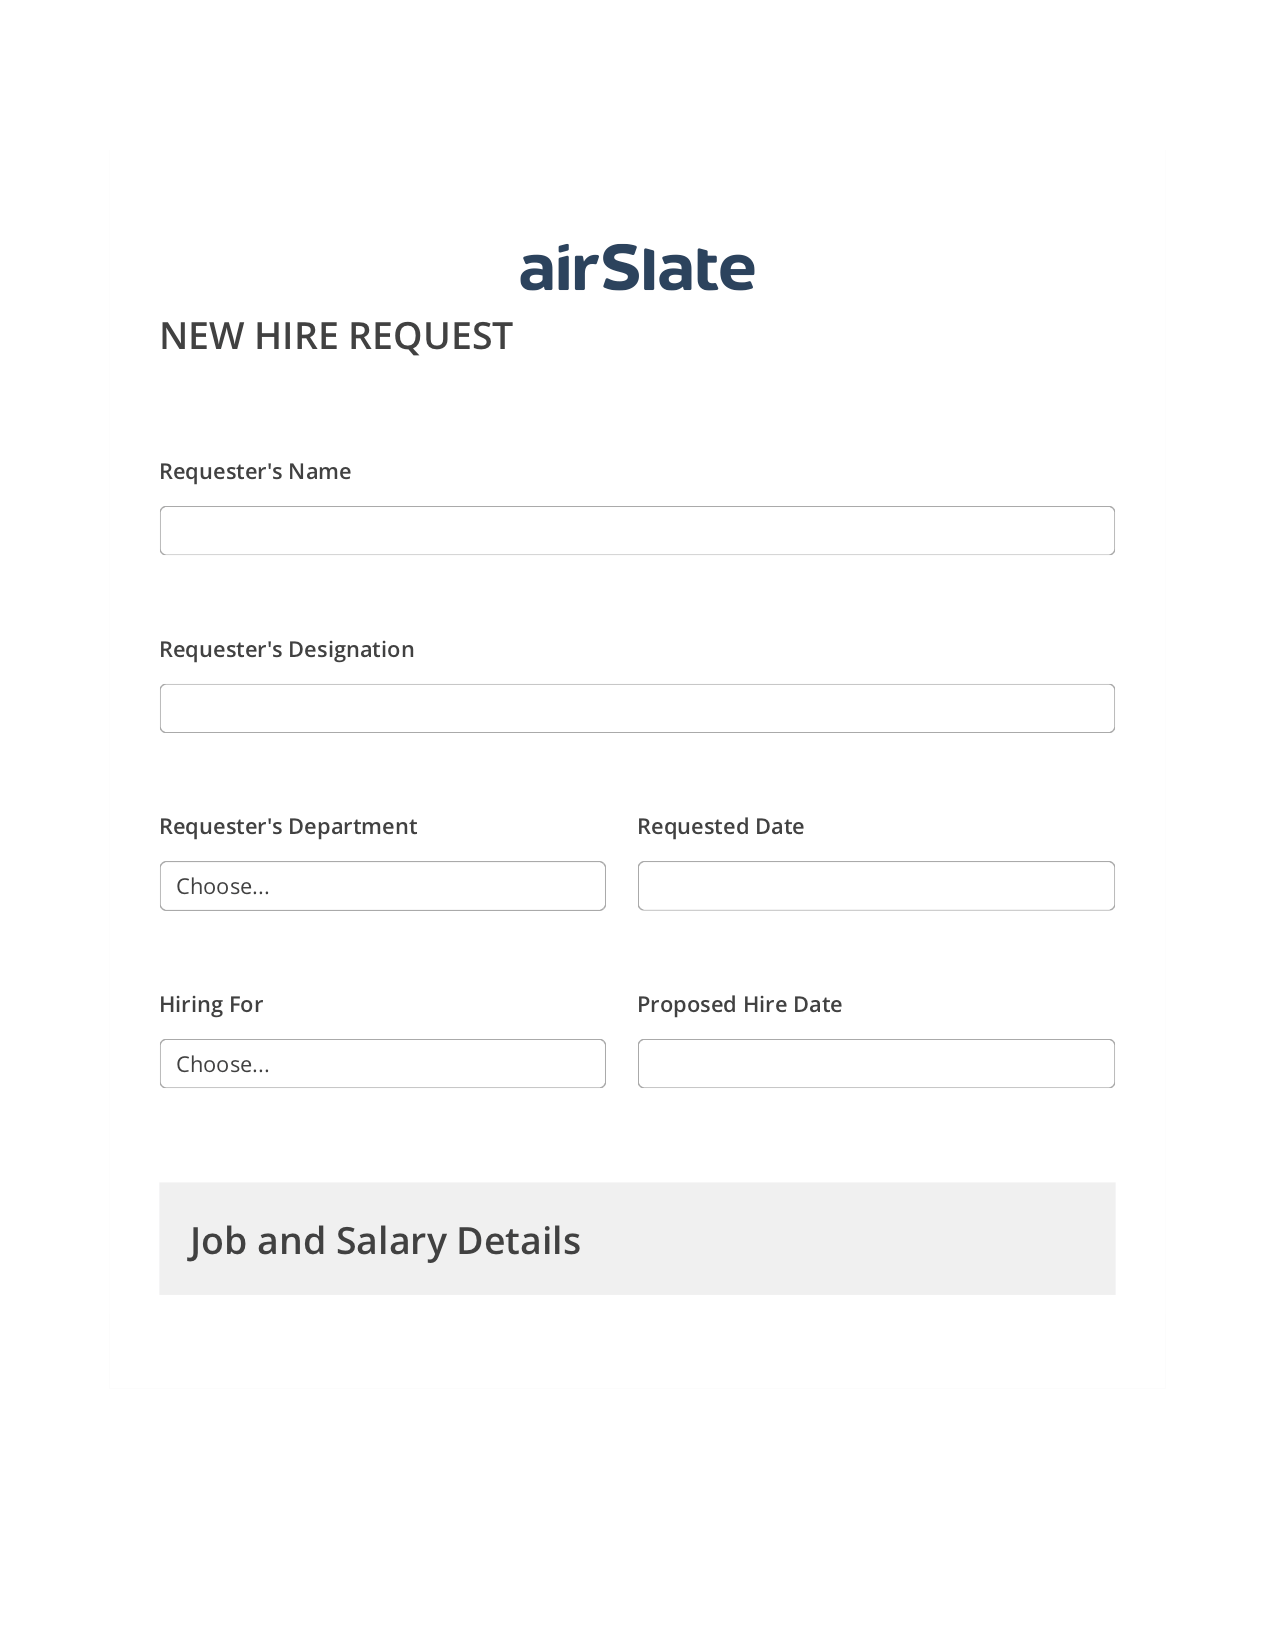 Hiring Request Workflow Pre-fill Dropdowns from Excel Bot, Invoke Salesforce Process Bot, Export to Salesforce Record Bot